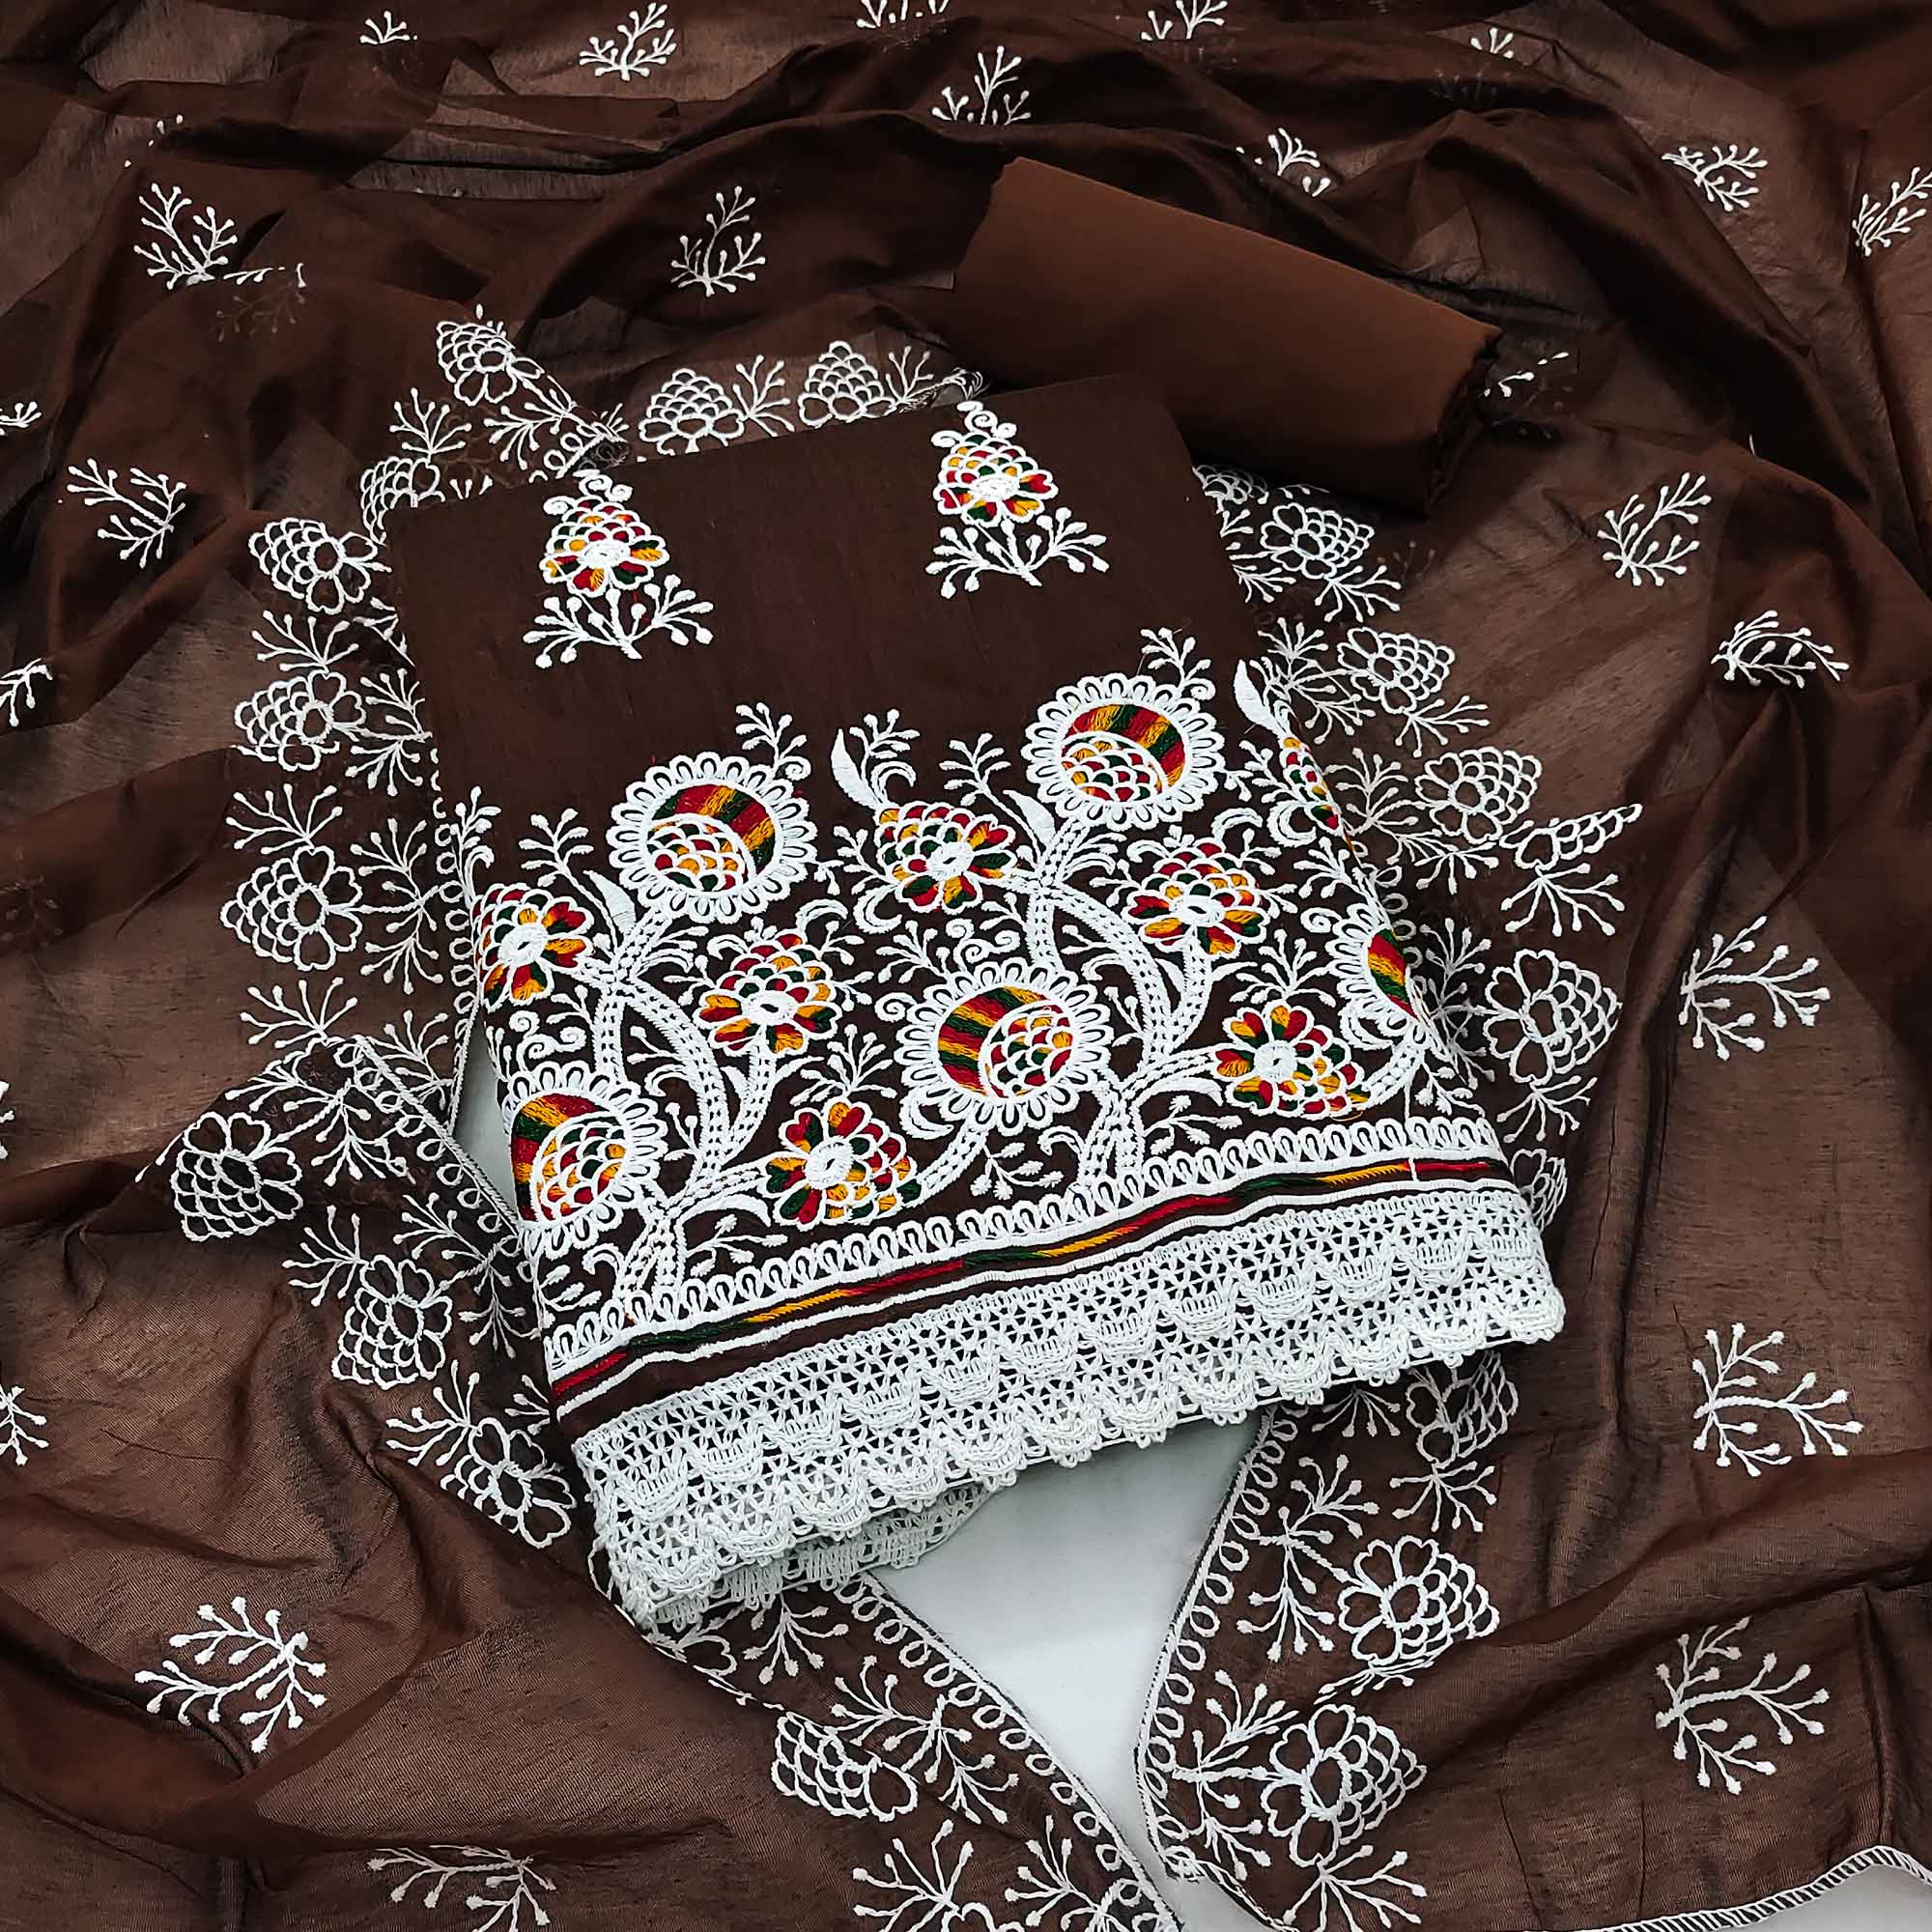 Brown Floral Embroidered Chanderi Cotton Dress Material